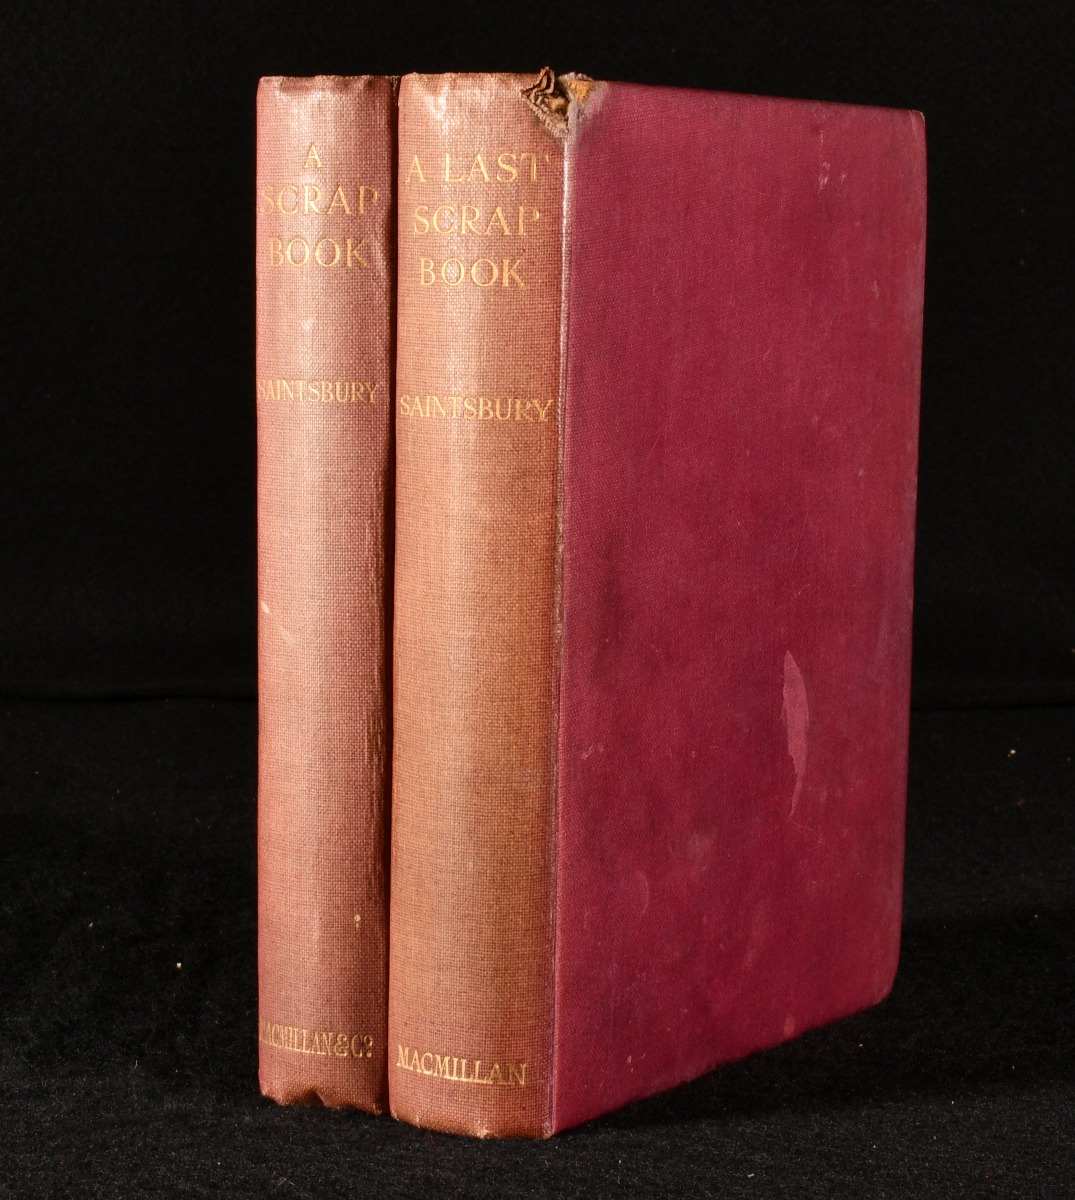 A Scrap Book and A Last Scrap Book by George Saintsbury: Good Cloth (1922)  First edition.